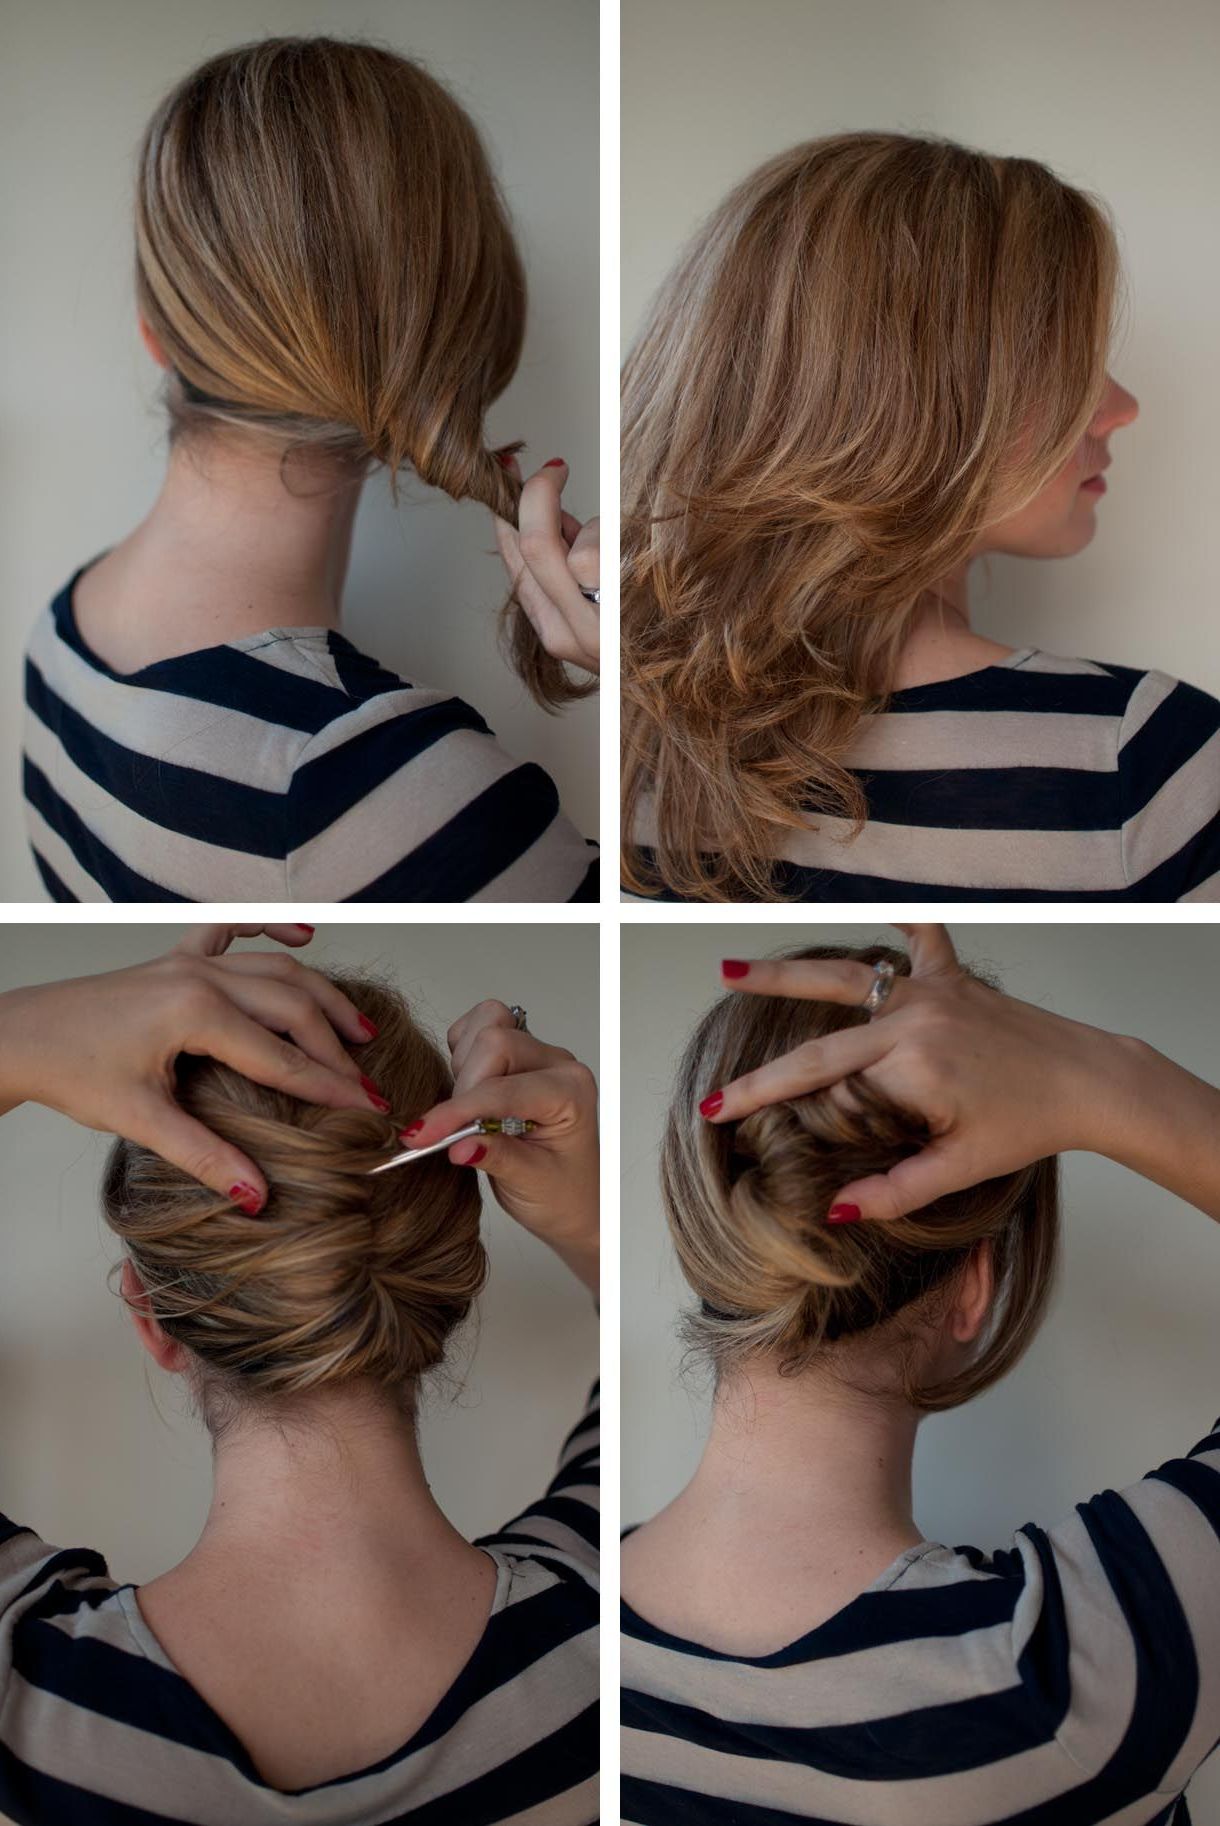 Hair Styles, Hair Pertaining To Recent Twisted Side Roll Prom Updos (View 8 of 20)